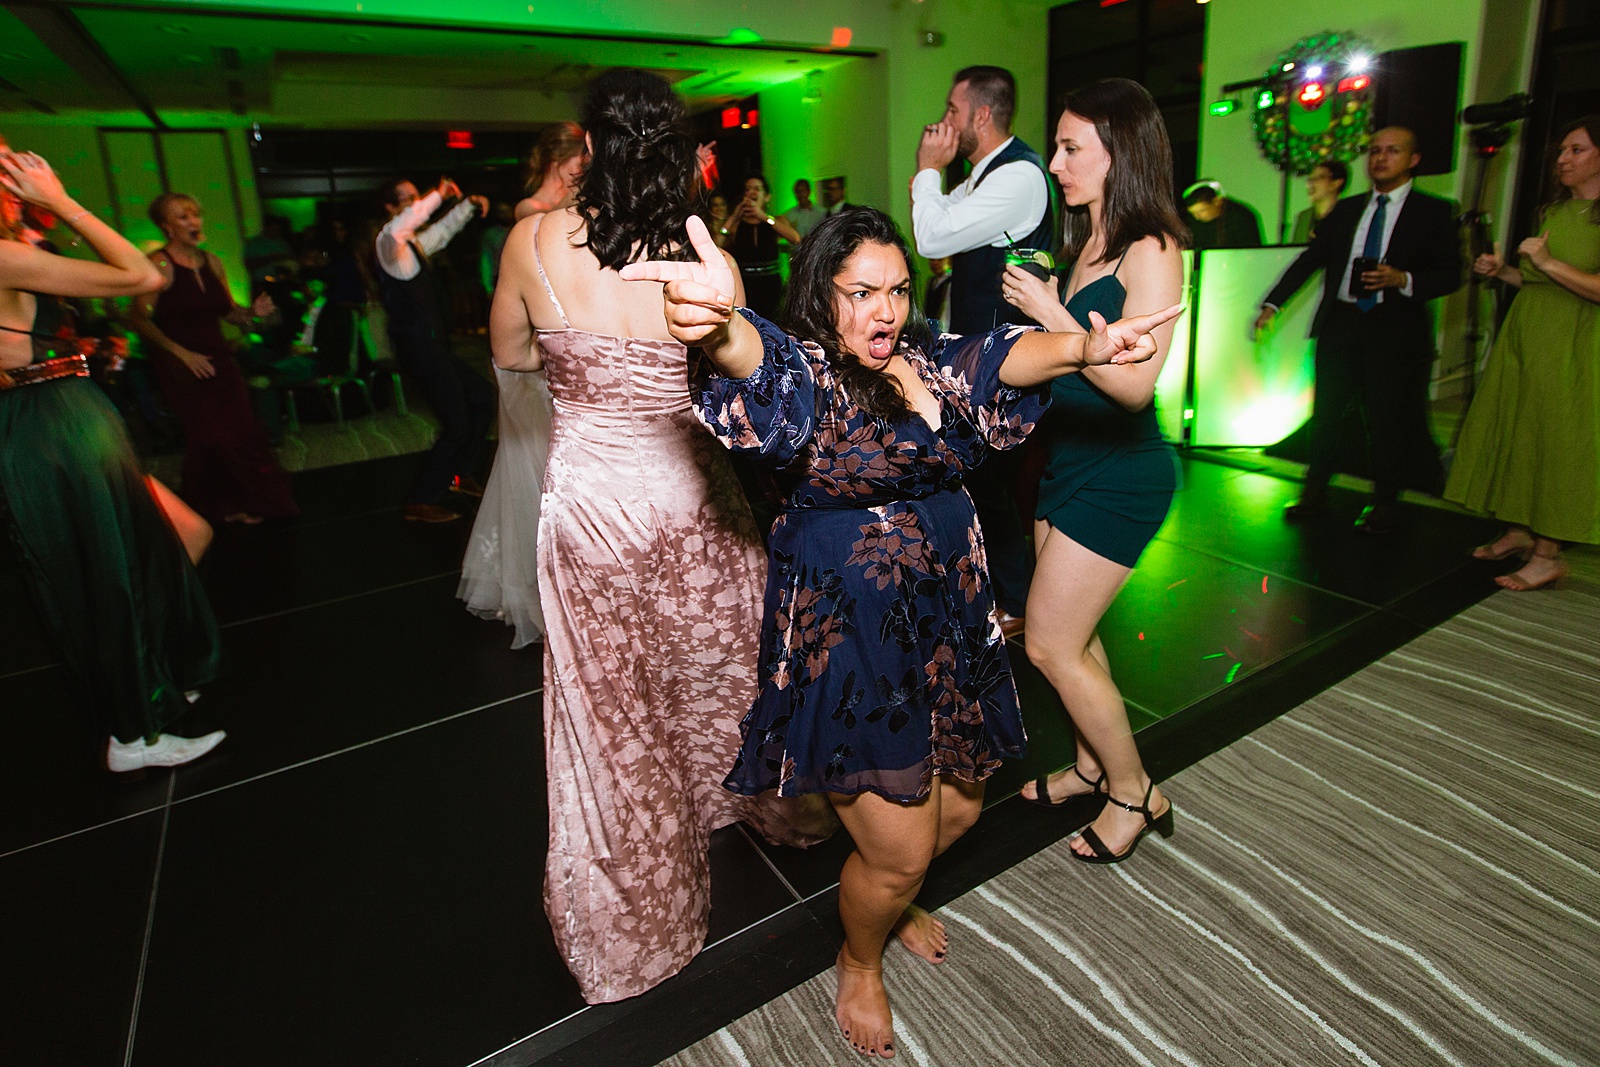 Guests dancing together at Sanctuary at Camelback wedding reception by Phoenix wedding photographer Juniper and Co Photography.